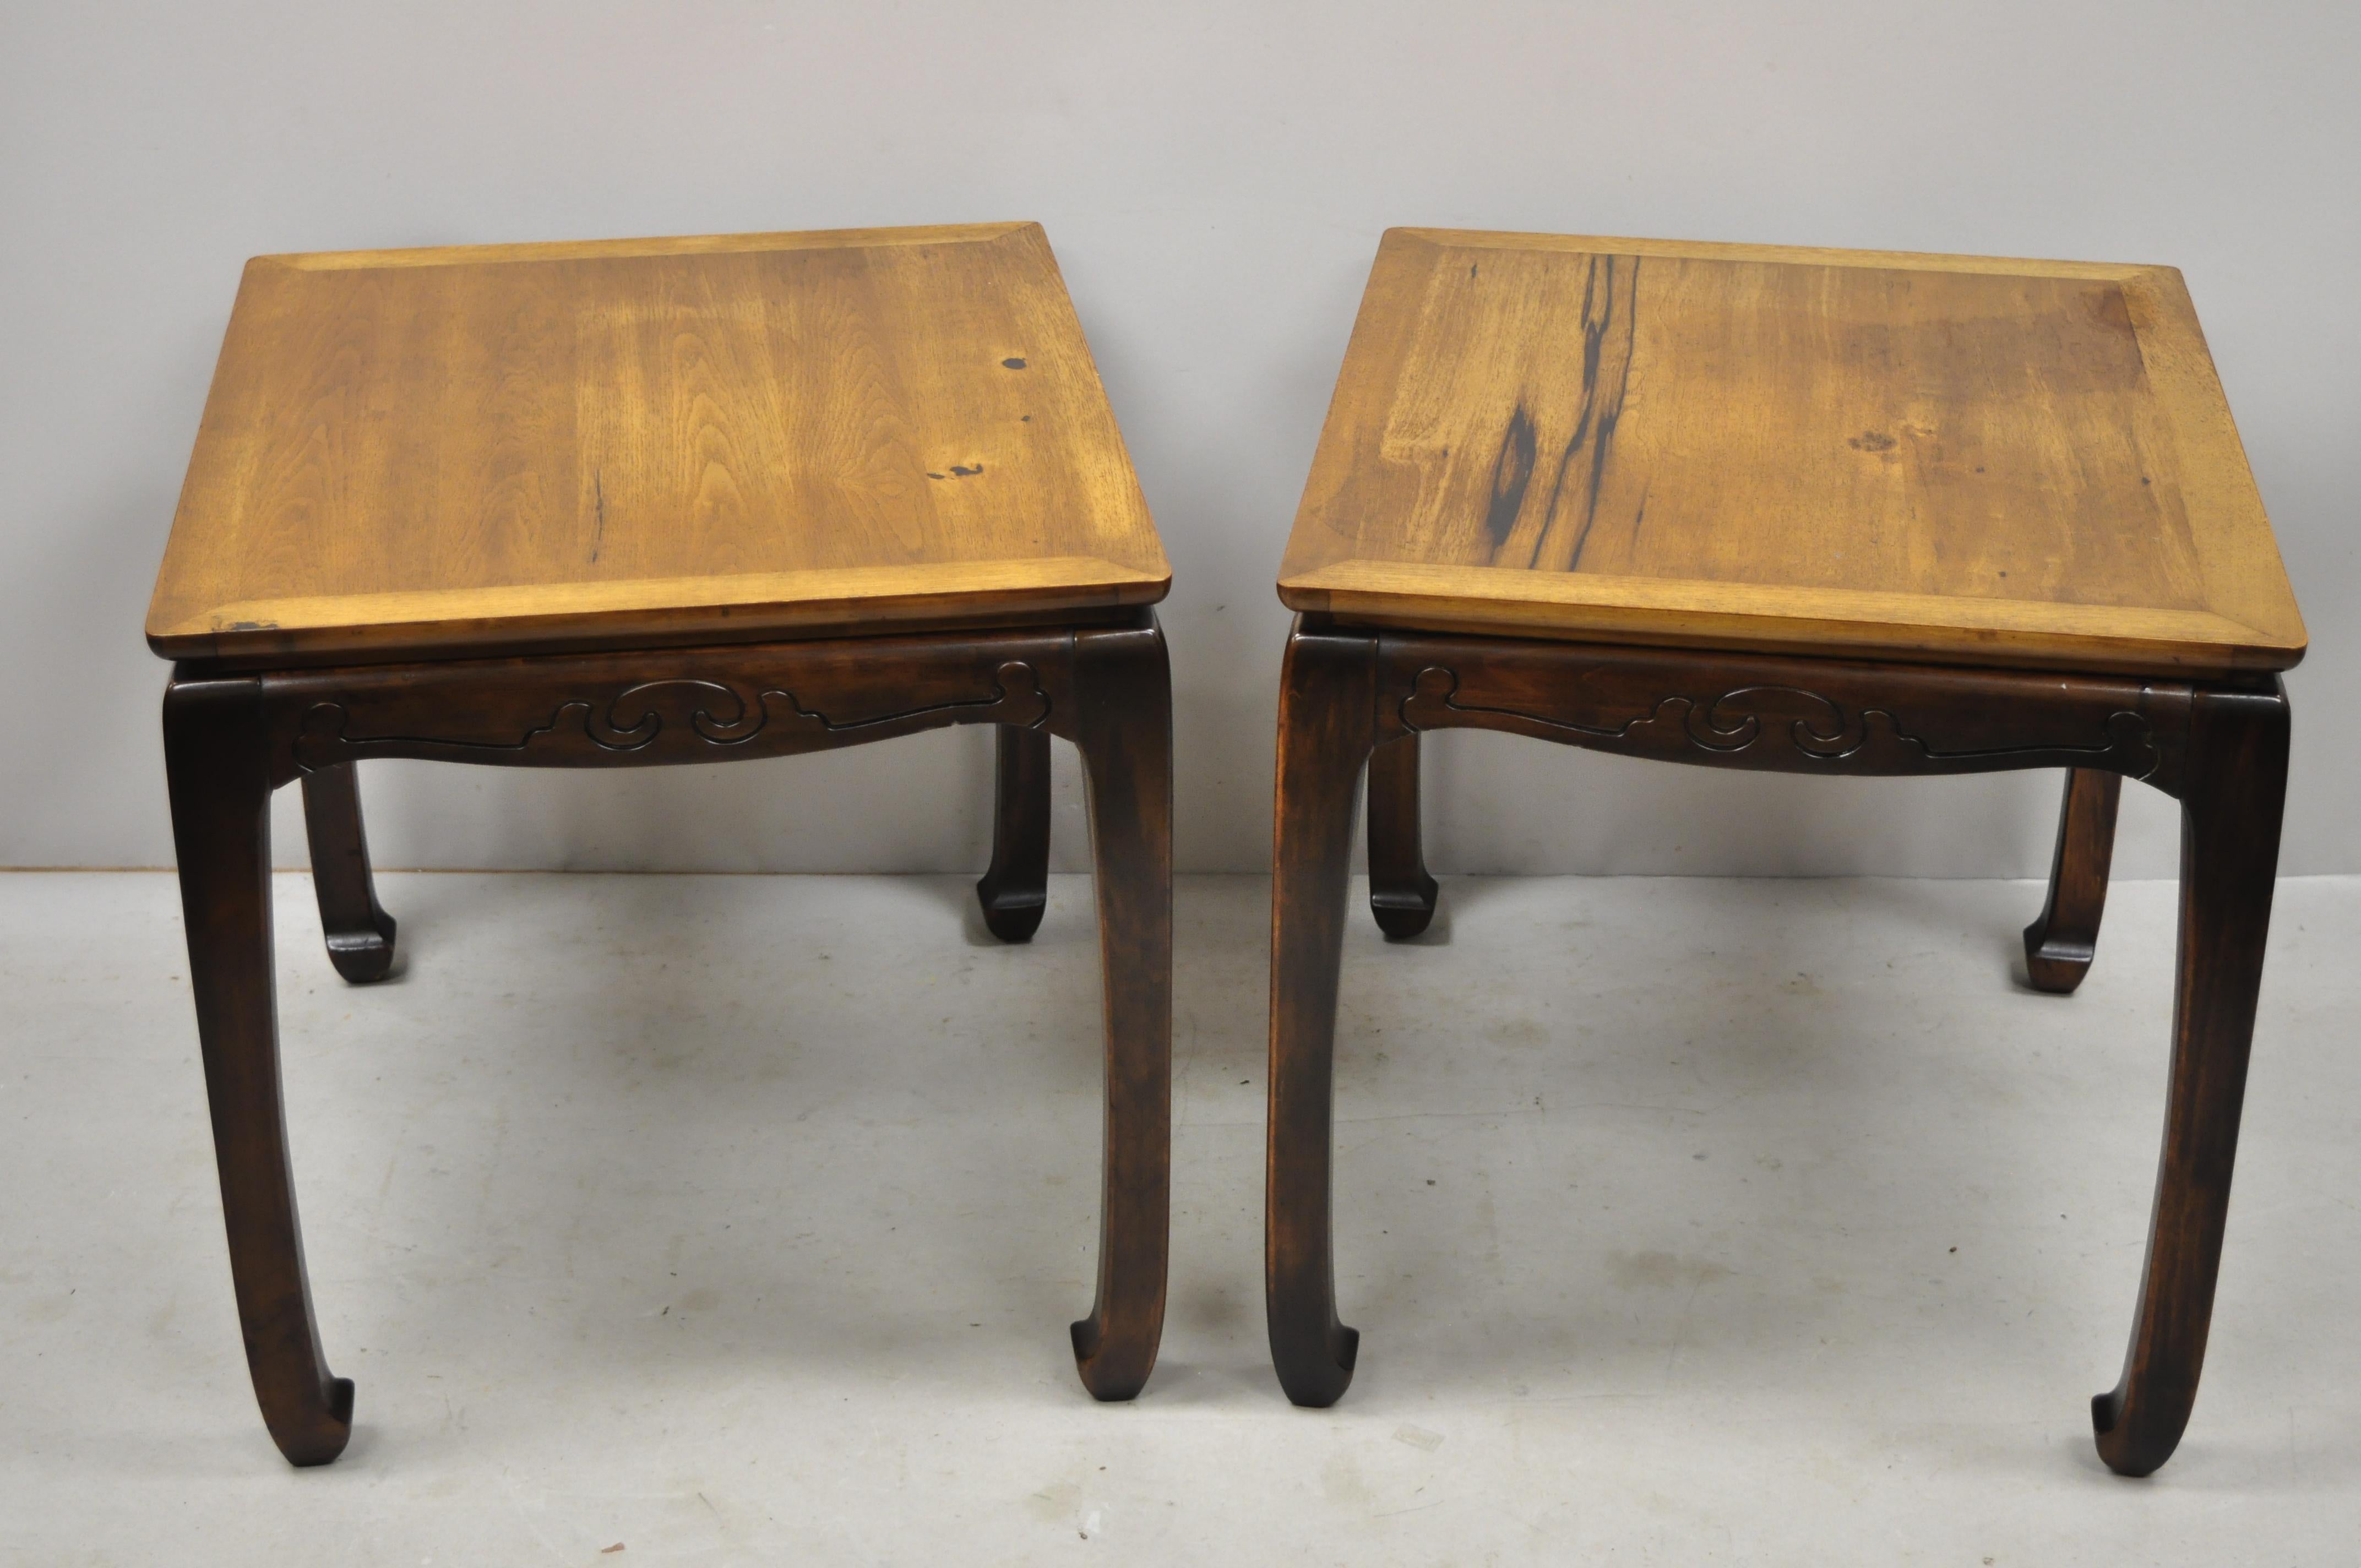 Pair of rosewood Oriental Chinoiserie Ming style lamp side tables by Lane. Item features solid wood frame, beautiful wood grain, original stamp, quality American craftsmanship, great style and form, circa mid-late 20th century. Measurements: 22